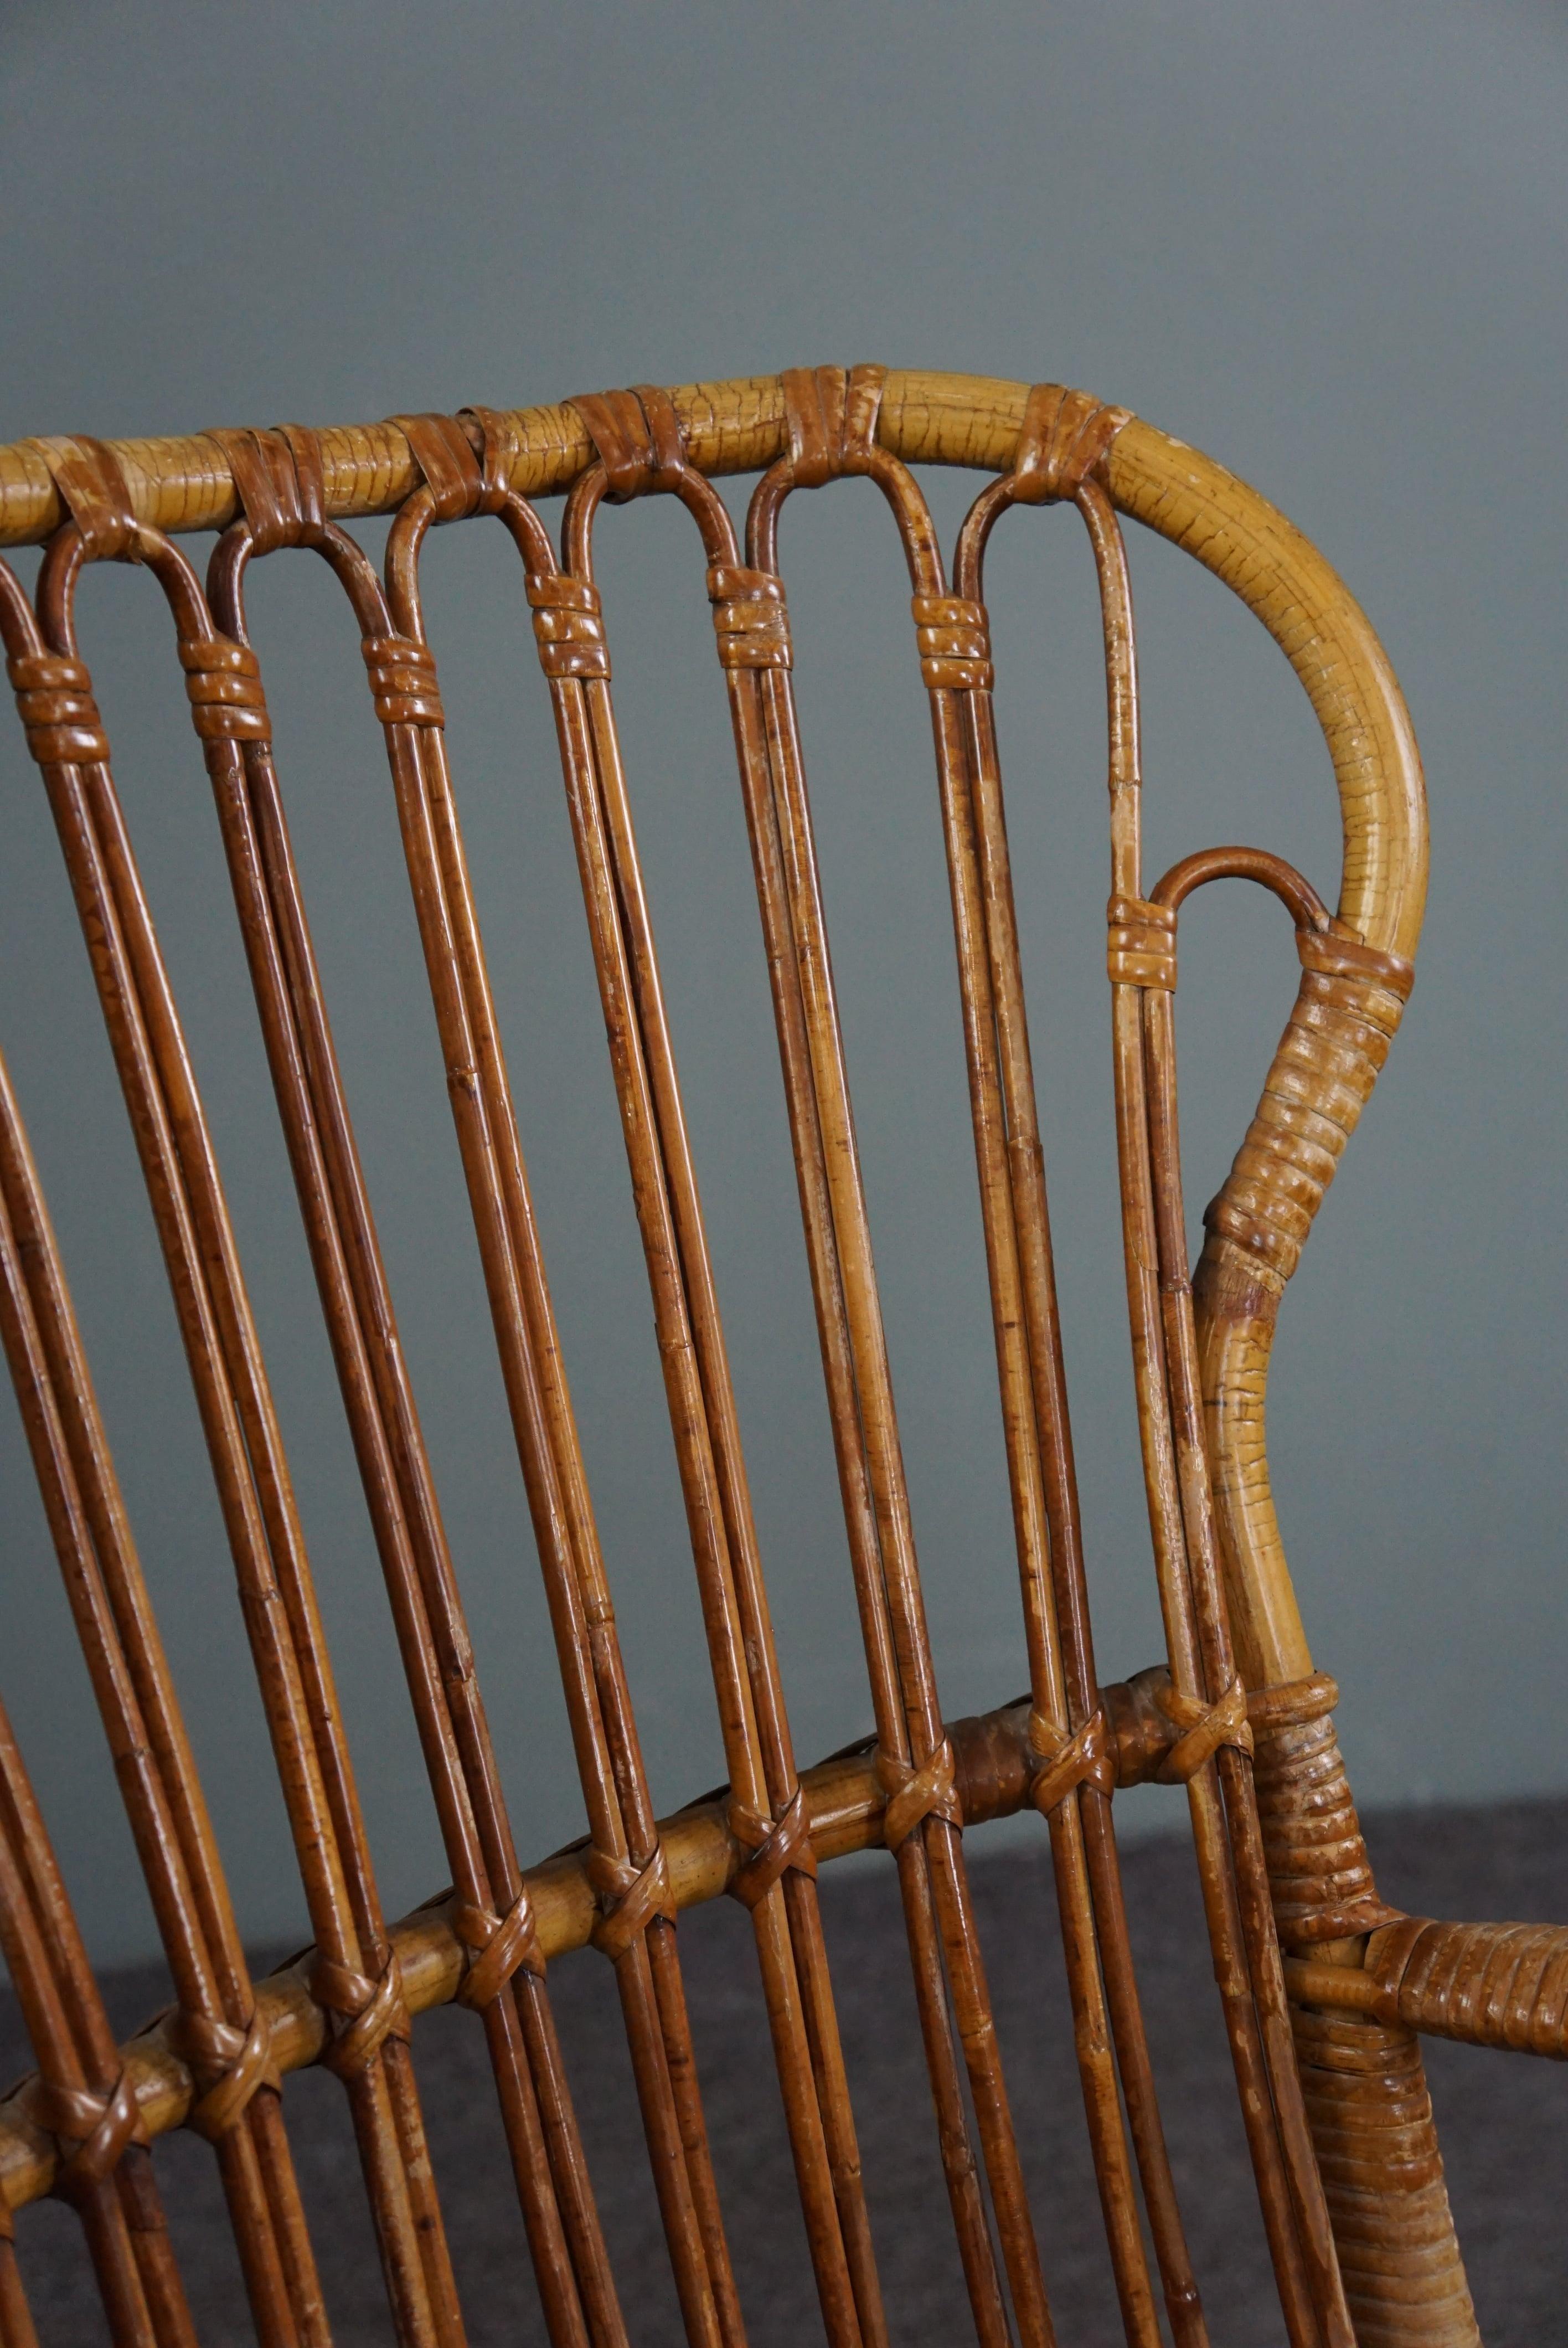 Rattan Belse 8 armchair with high back, Dutch Design, 1950 For Sale 2